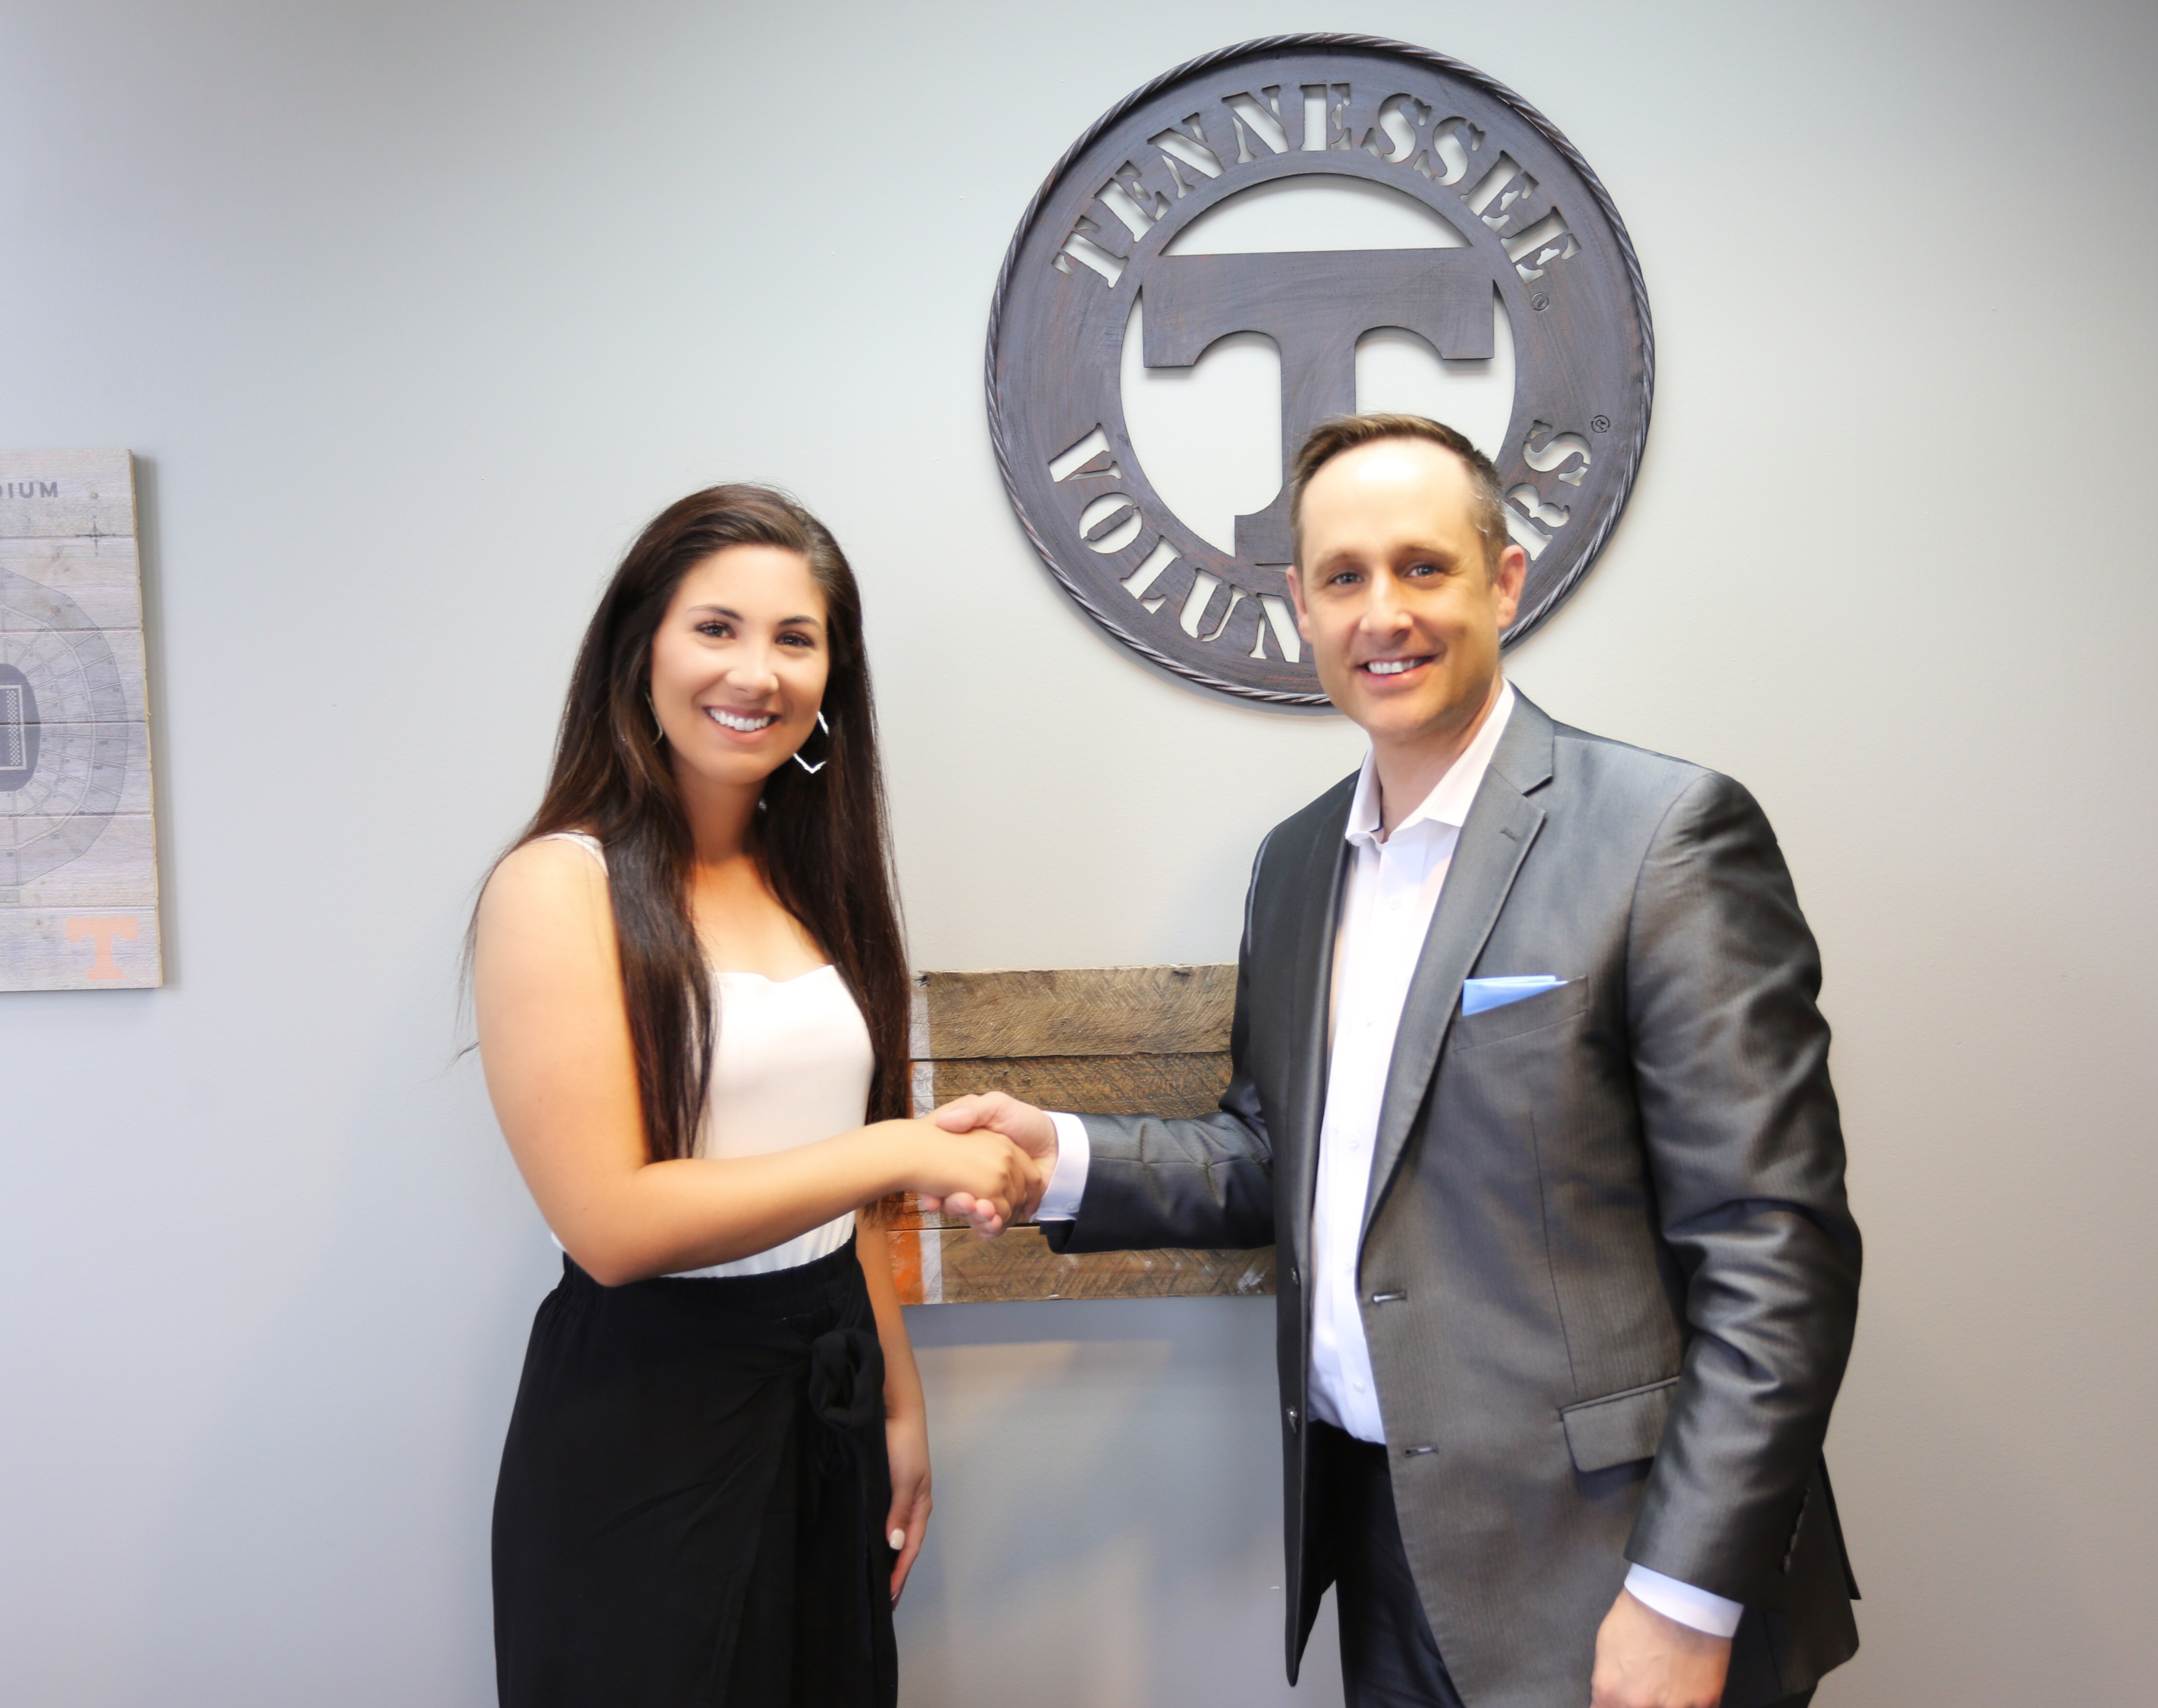 MORTGAGE INVESTORS GROUP PARTNERS WITH LOCAL PRO GOLFER SOPHIA SCHUBERT